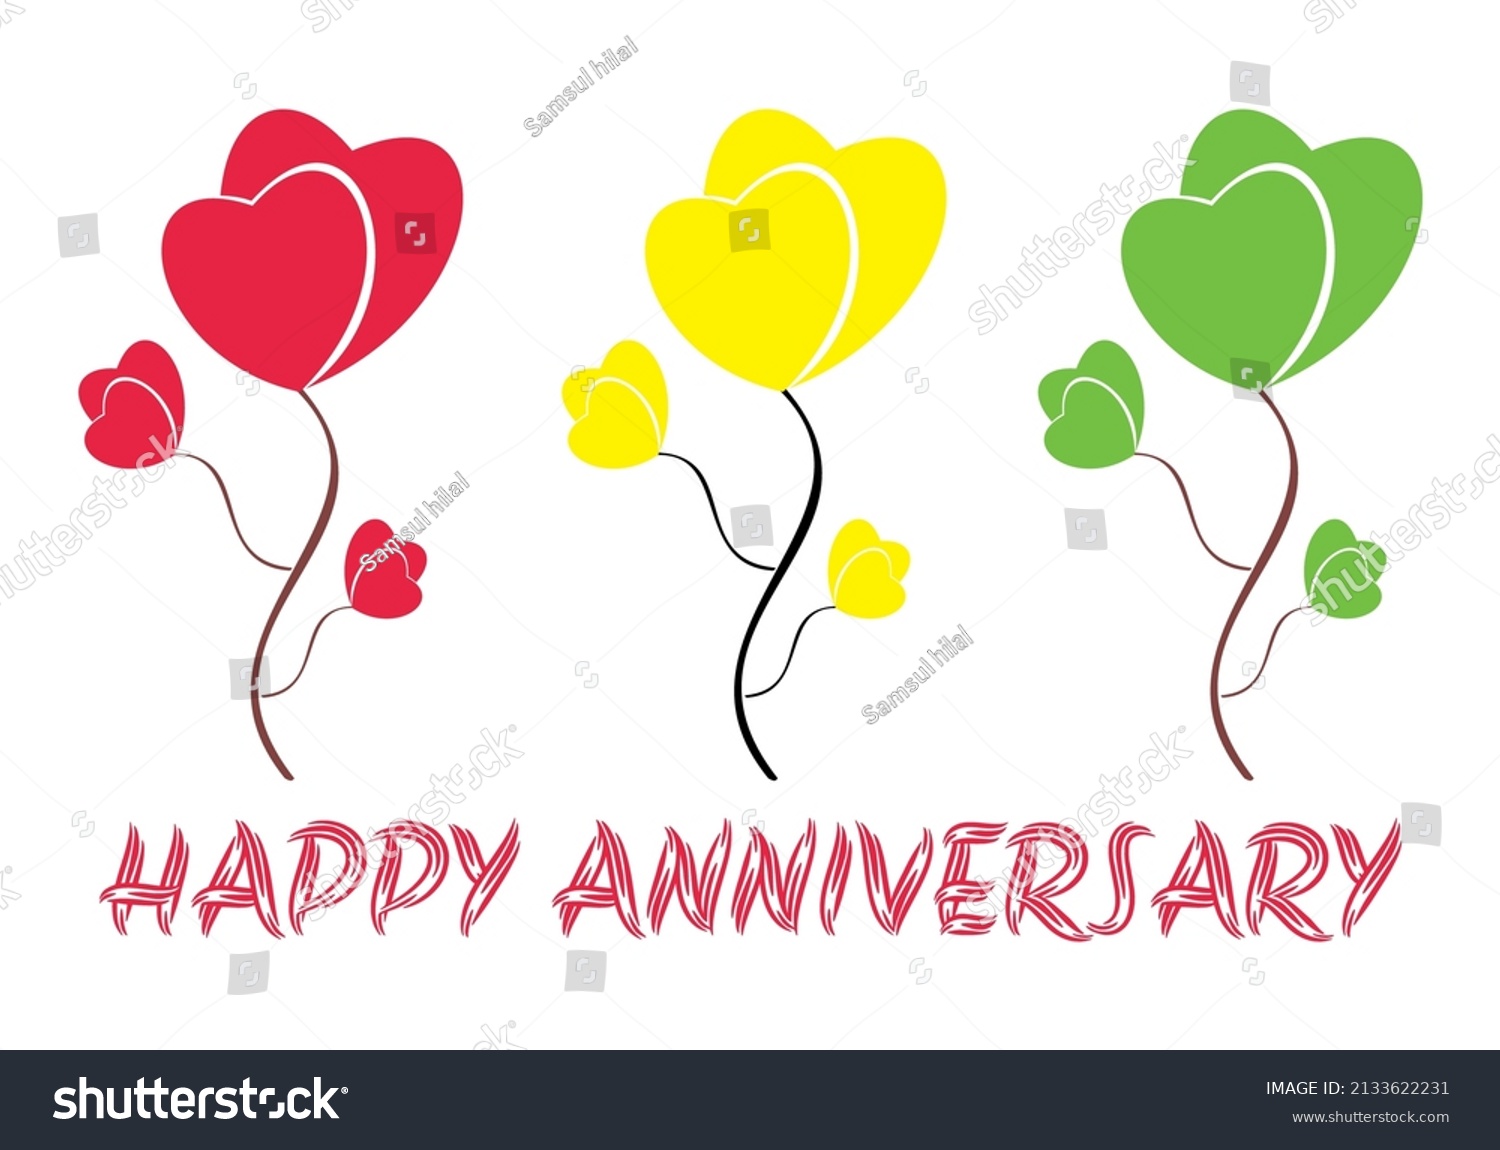 Happy Anniversary Greetings On White Background Stock Vector Royalty